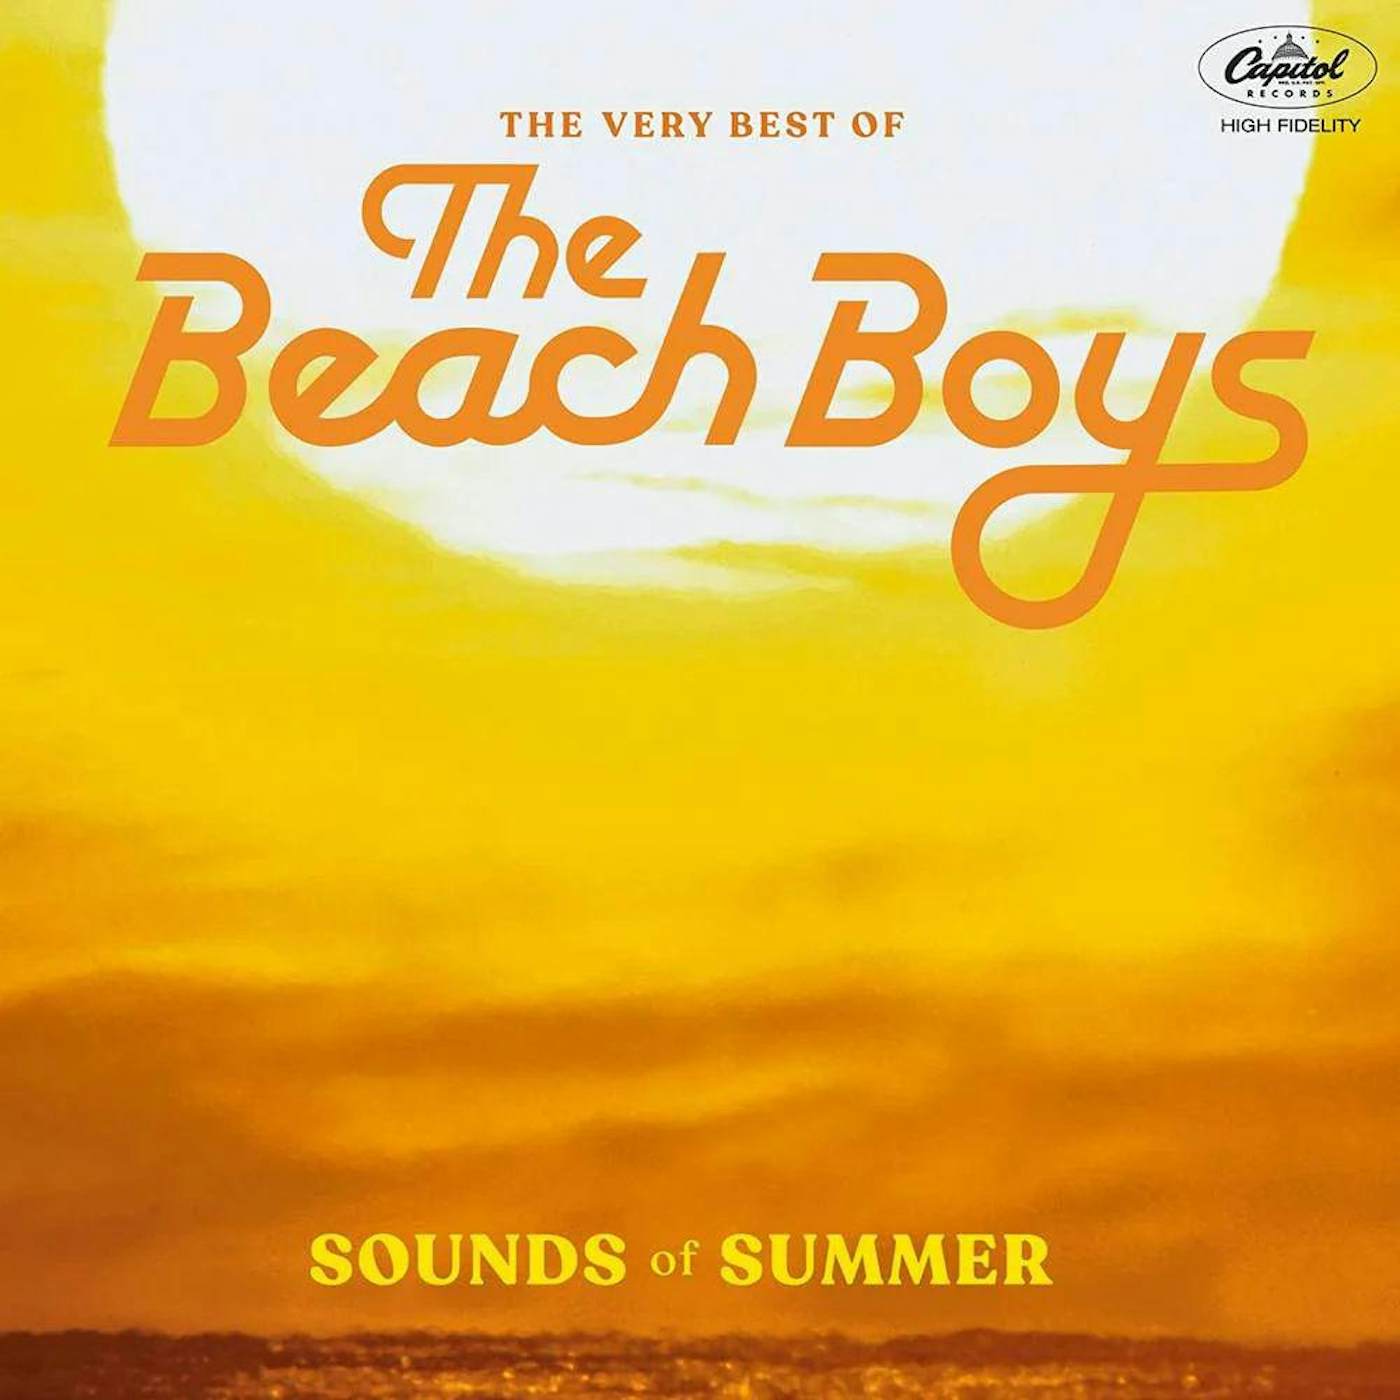 Sounds Of Summer: The Very Best Of The Beach Boys (Remastered/2LP) Vinyl Vecord